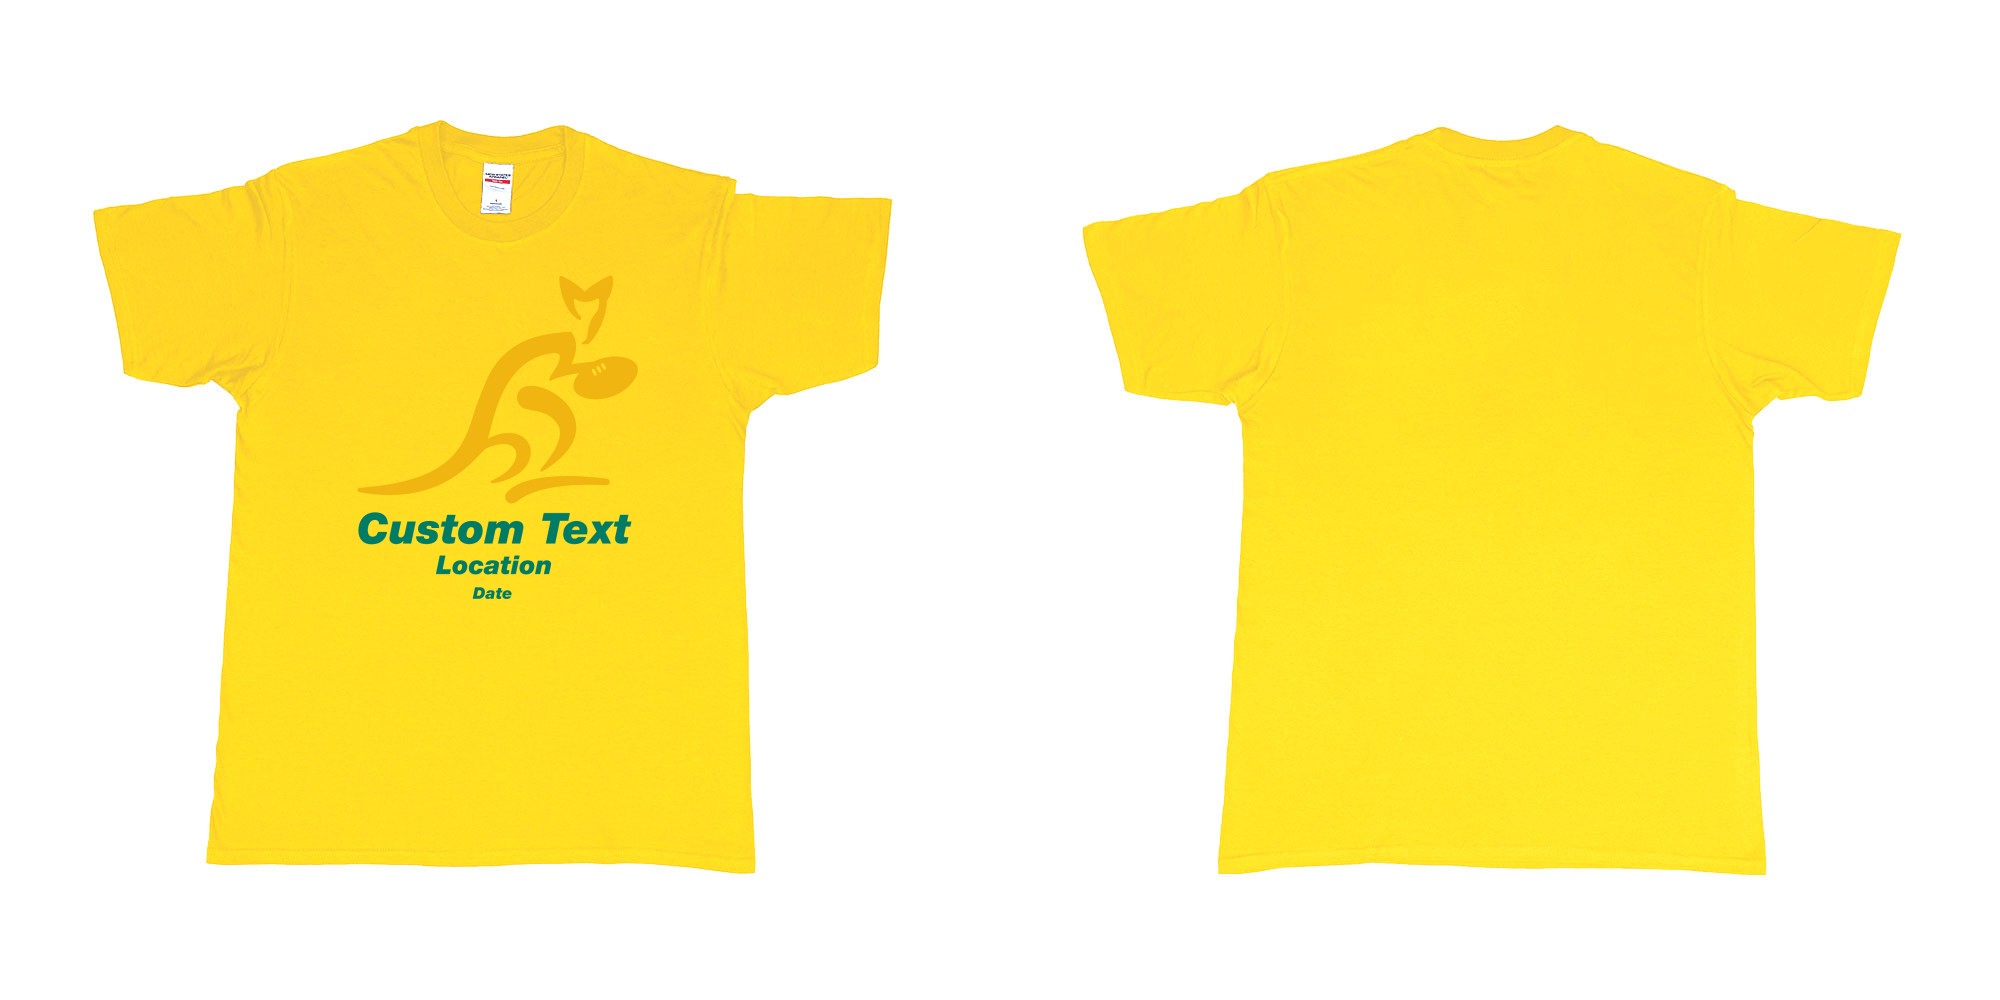 Custom tshirt design australia national rugby union team the wallabies in fabric color daisy choice your own text made in Bali by The Pirate Way